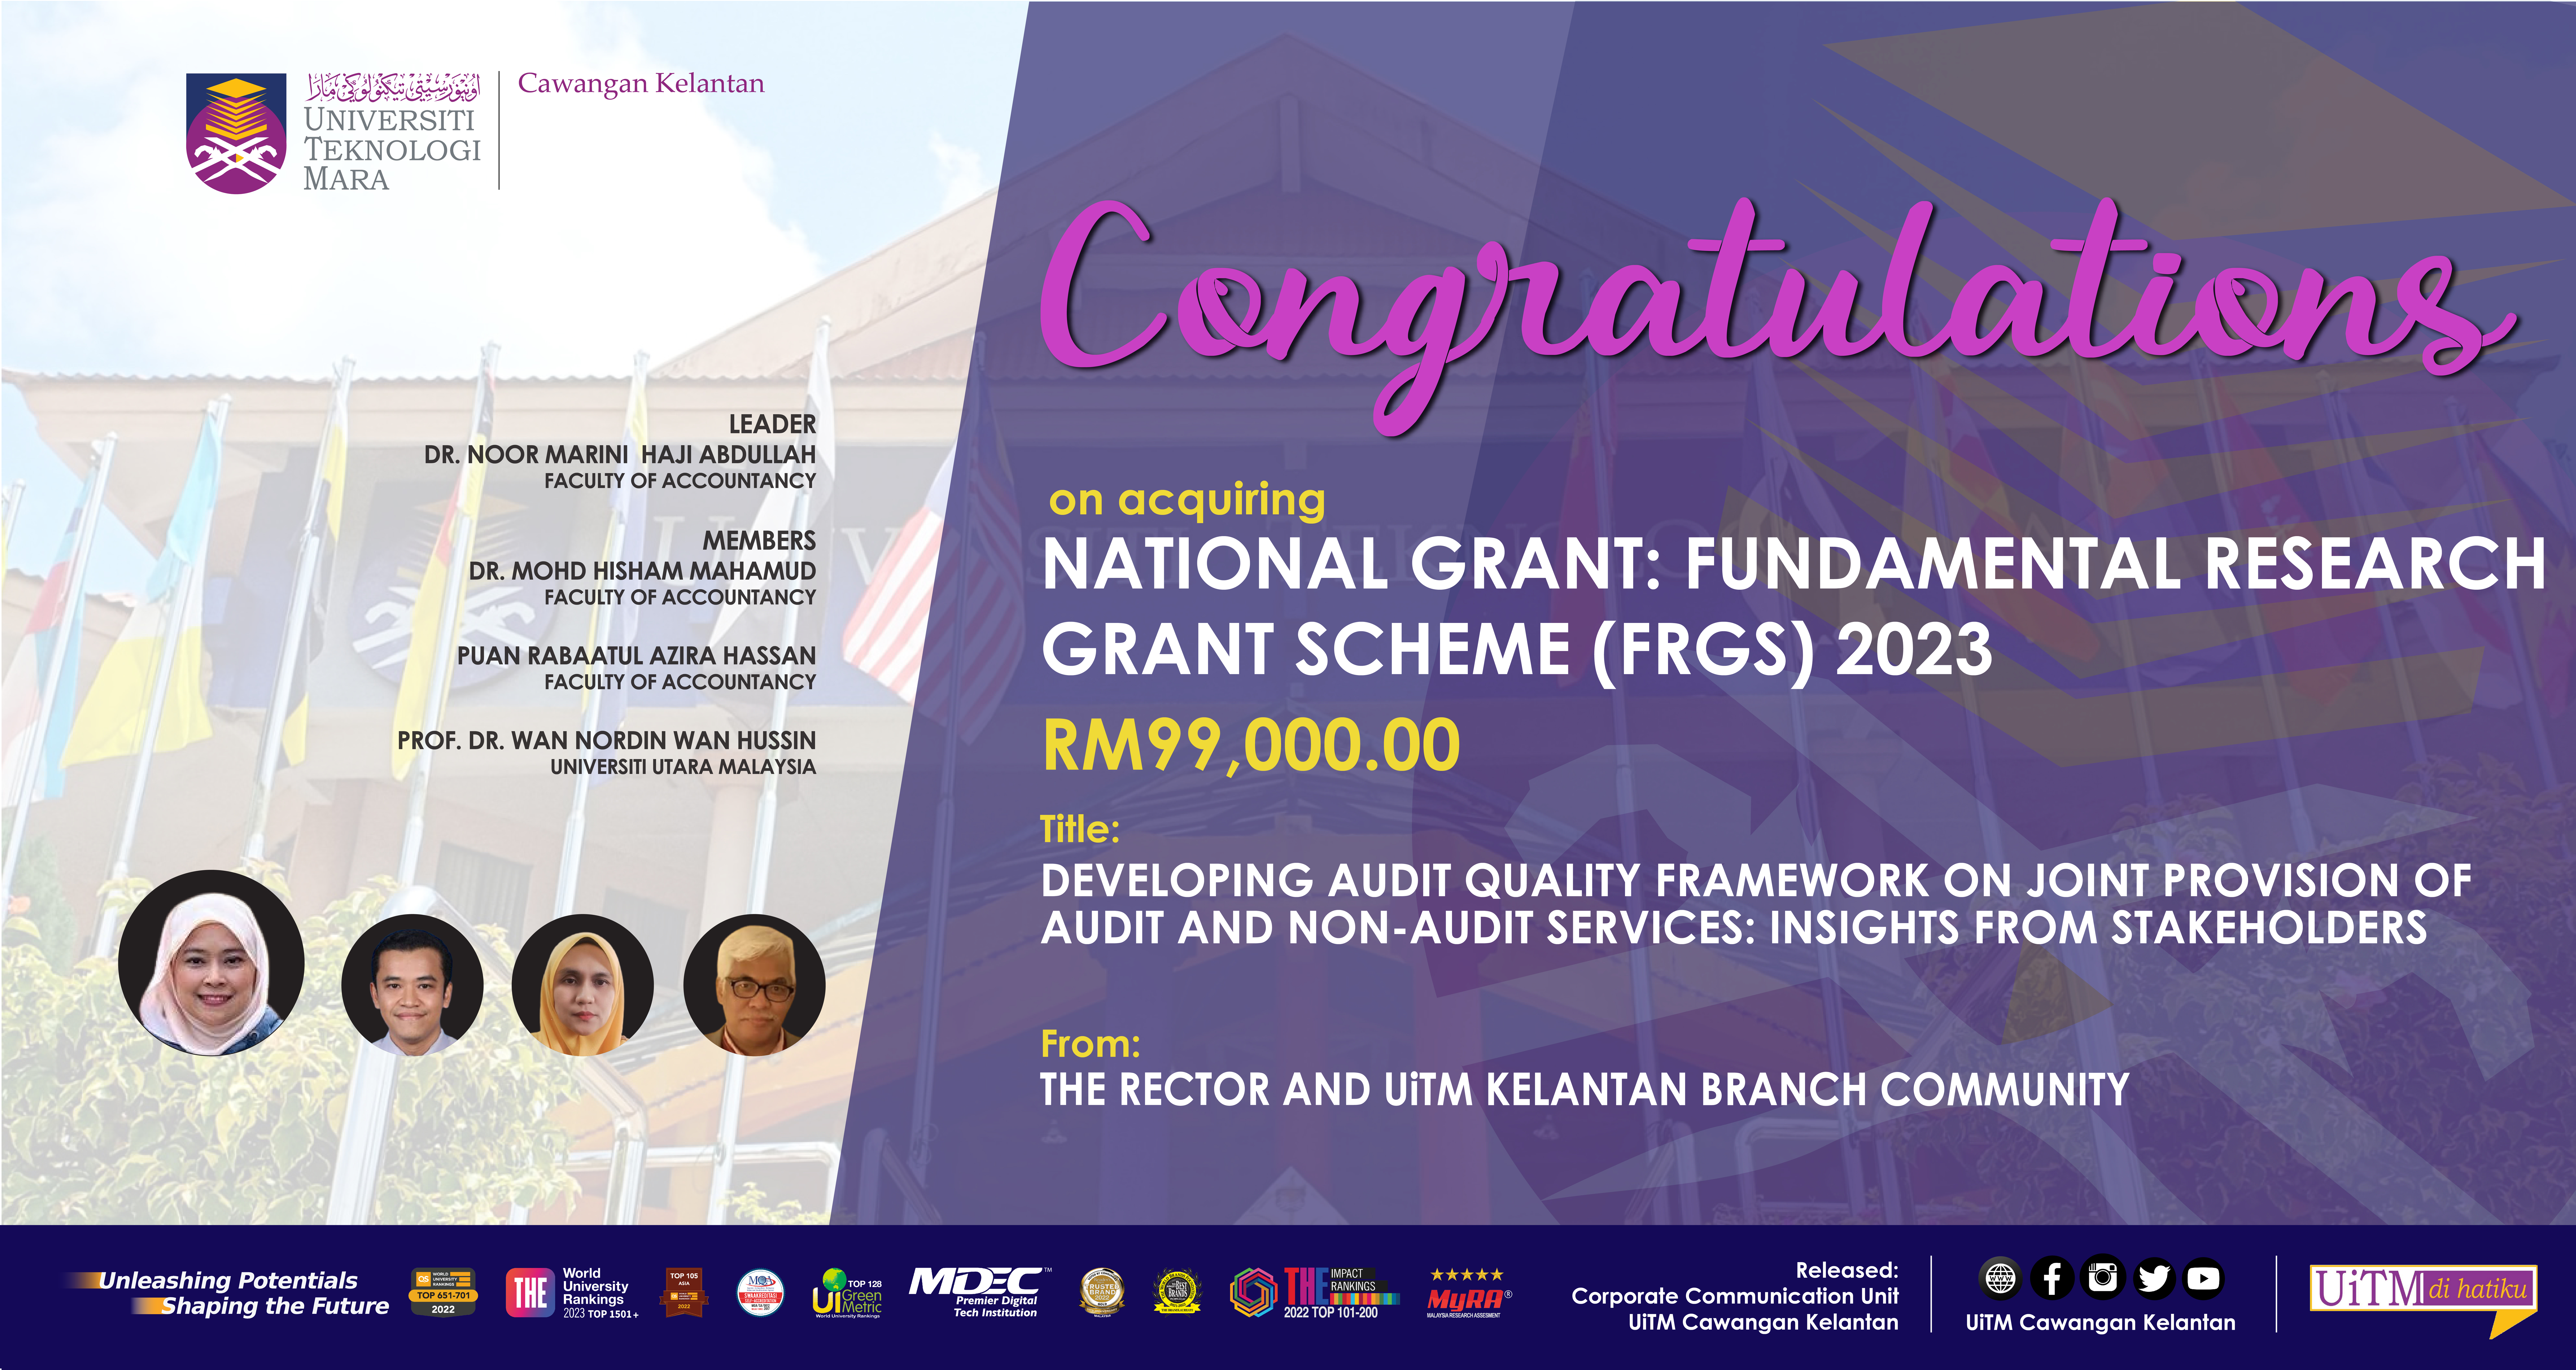 Congratulations!!! National Grant: Fundamental Research Grant Scheme (FRGS) 2023 (Developing Audit Quality Framework On Joint Provision Of Audit And Non-Audit Services: Insights From Stakeholders)